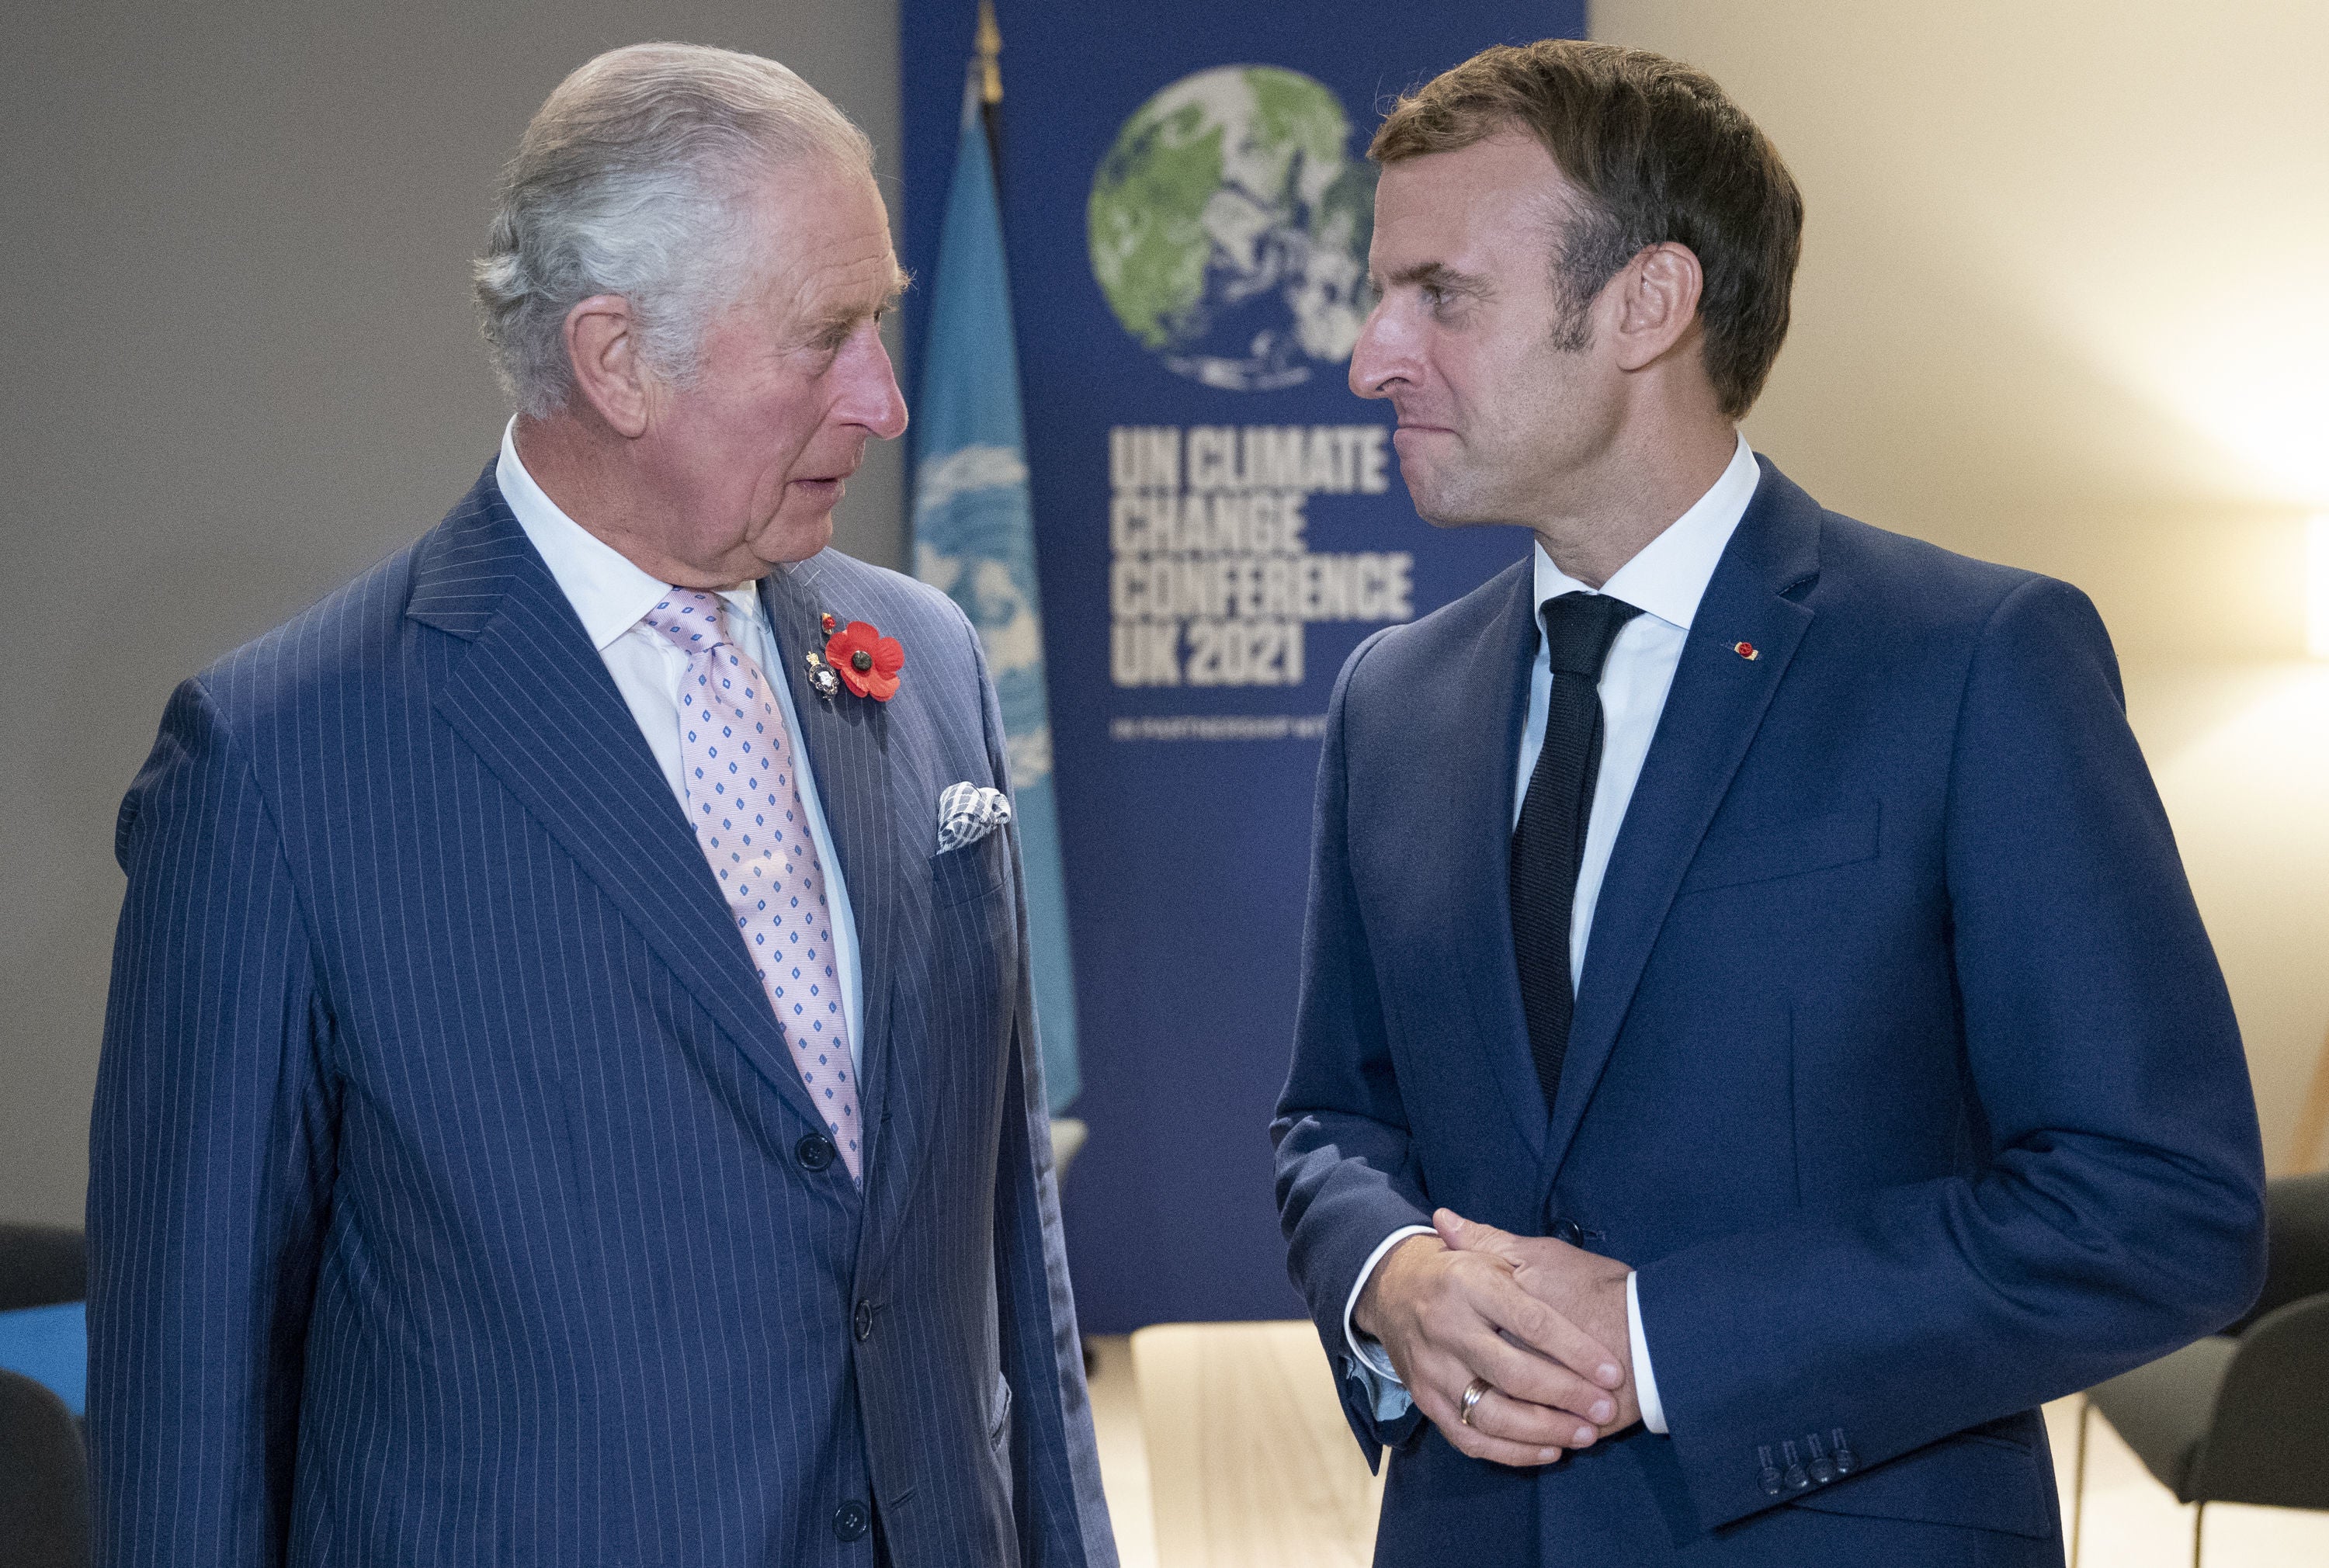 President Macron seems keen to revive traditional friendships